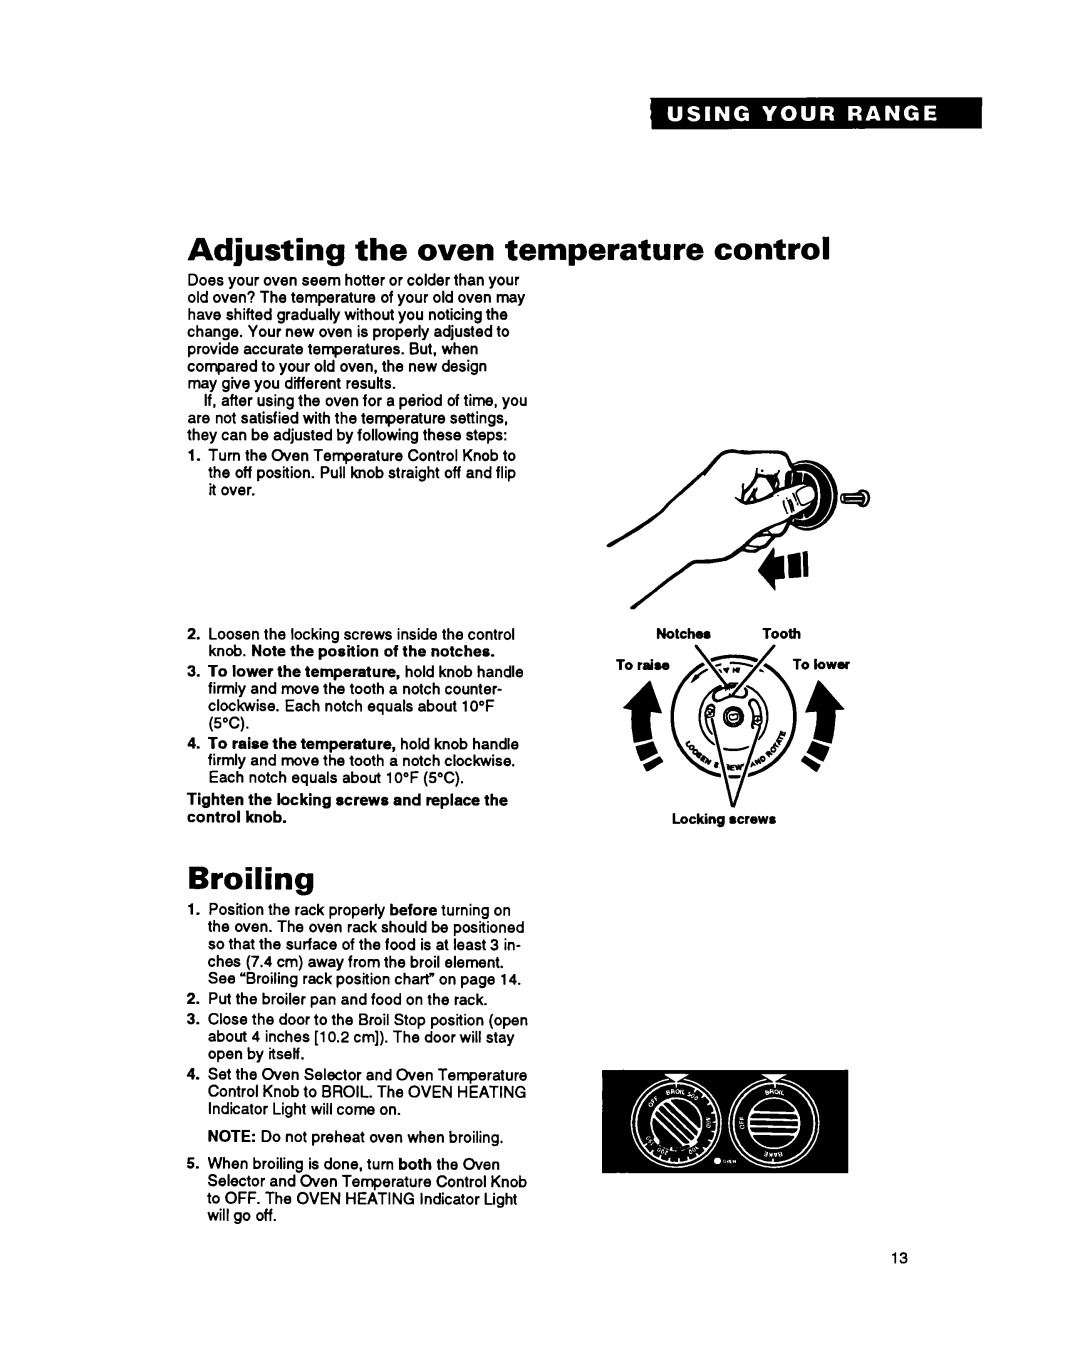 Whirlpool FEP340Y important safety instructions Adjusting the oven temperature control, Broiling 